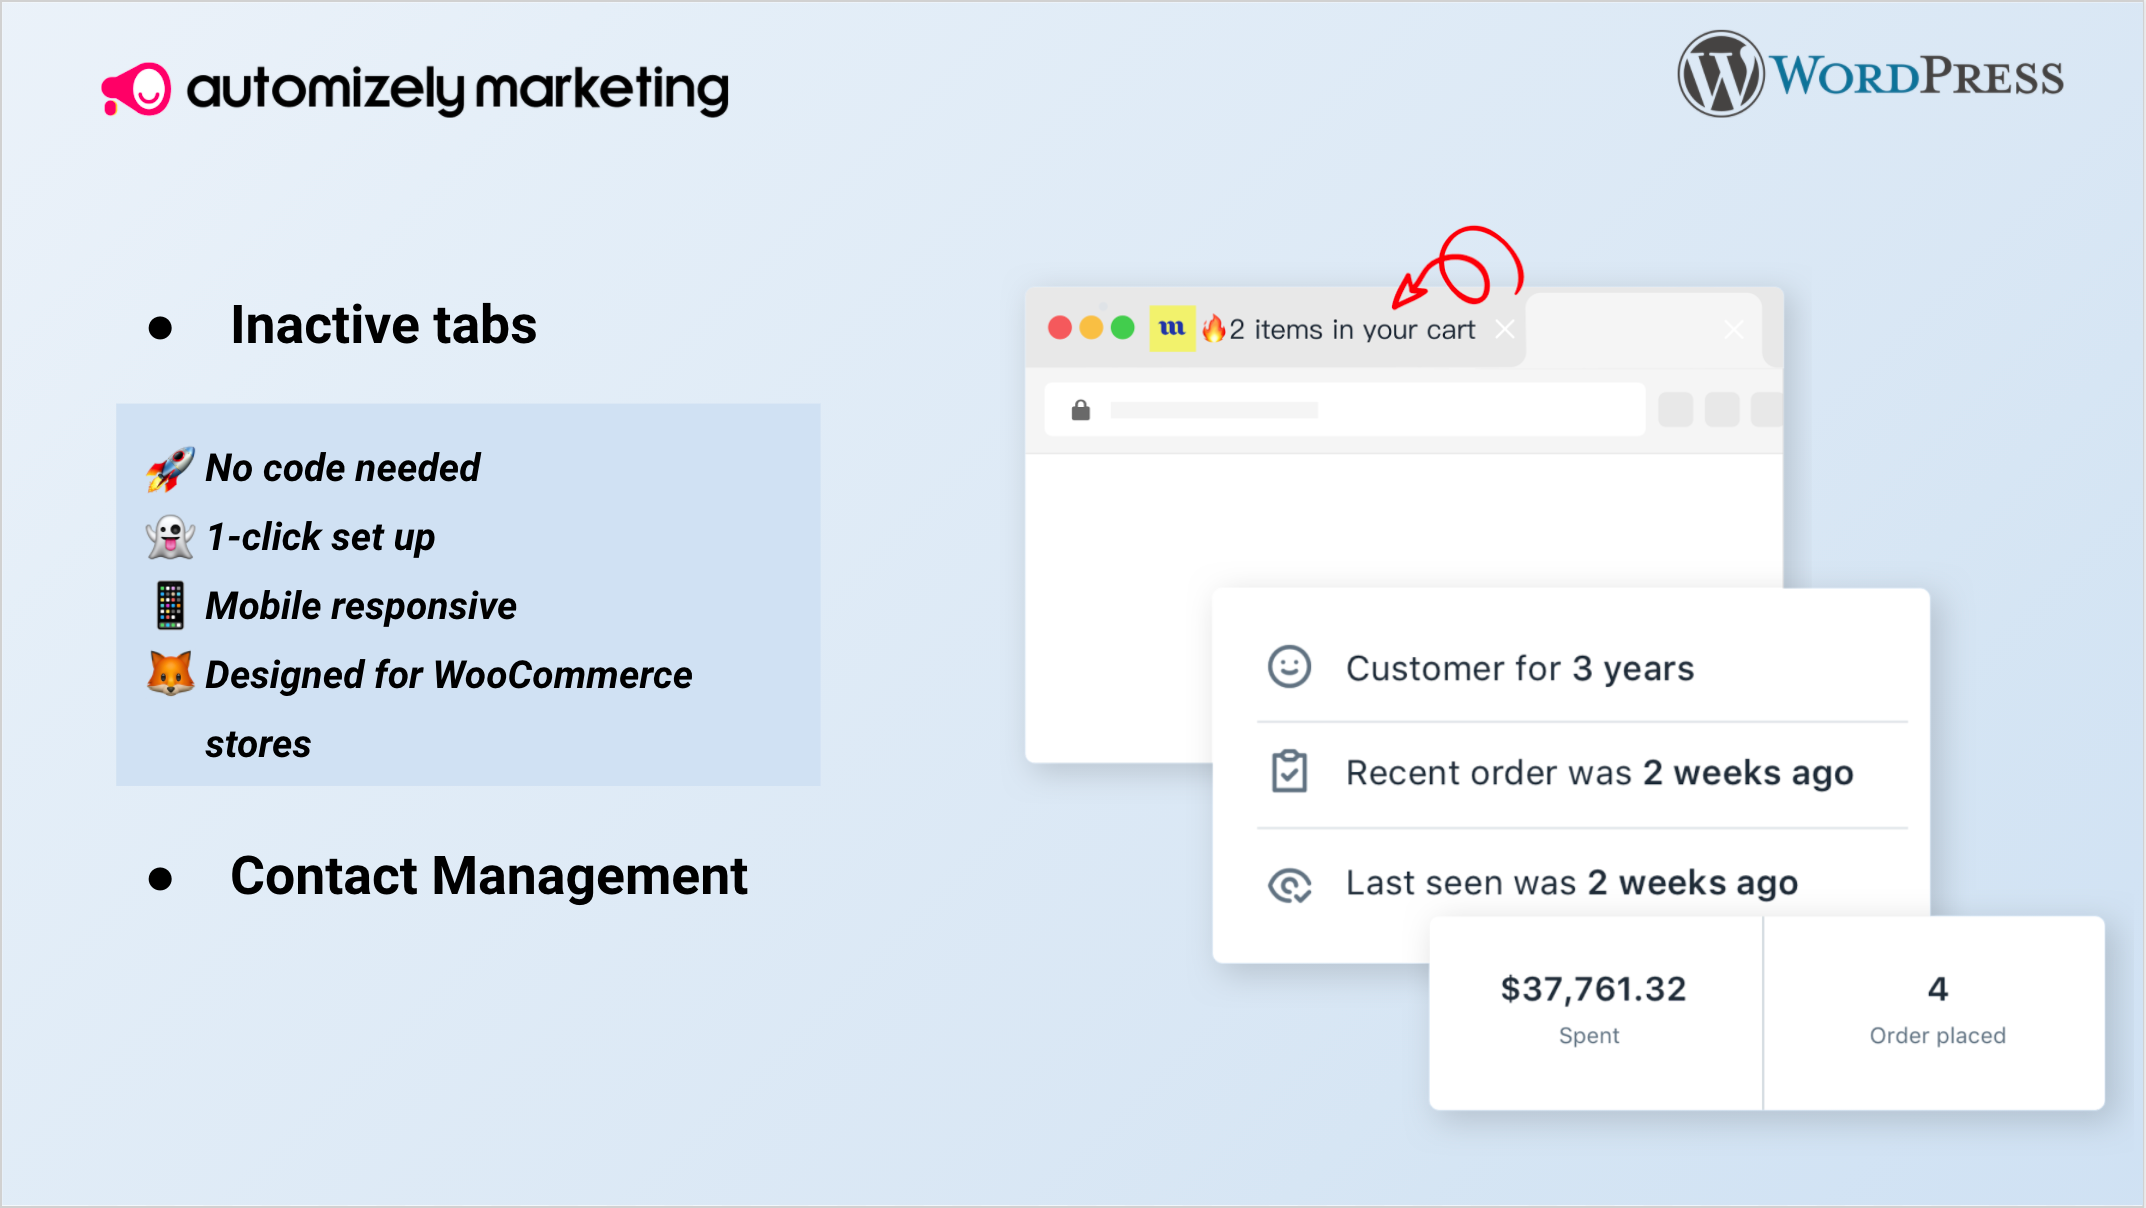 Automizely Marketing’s suite continues with more features like a CRM, blinking browser tabs, and more.